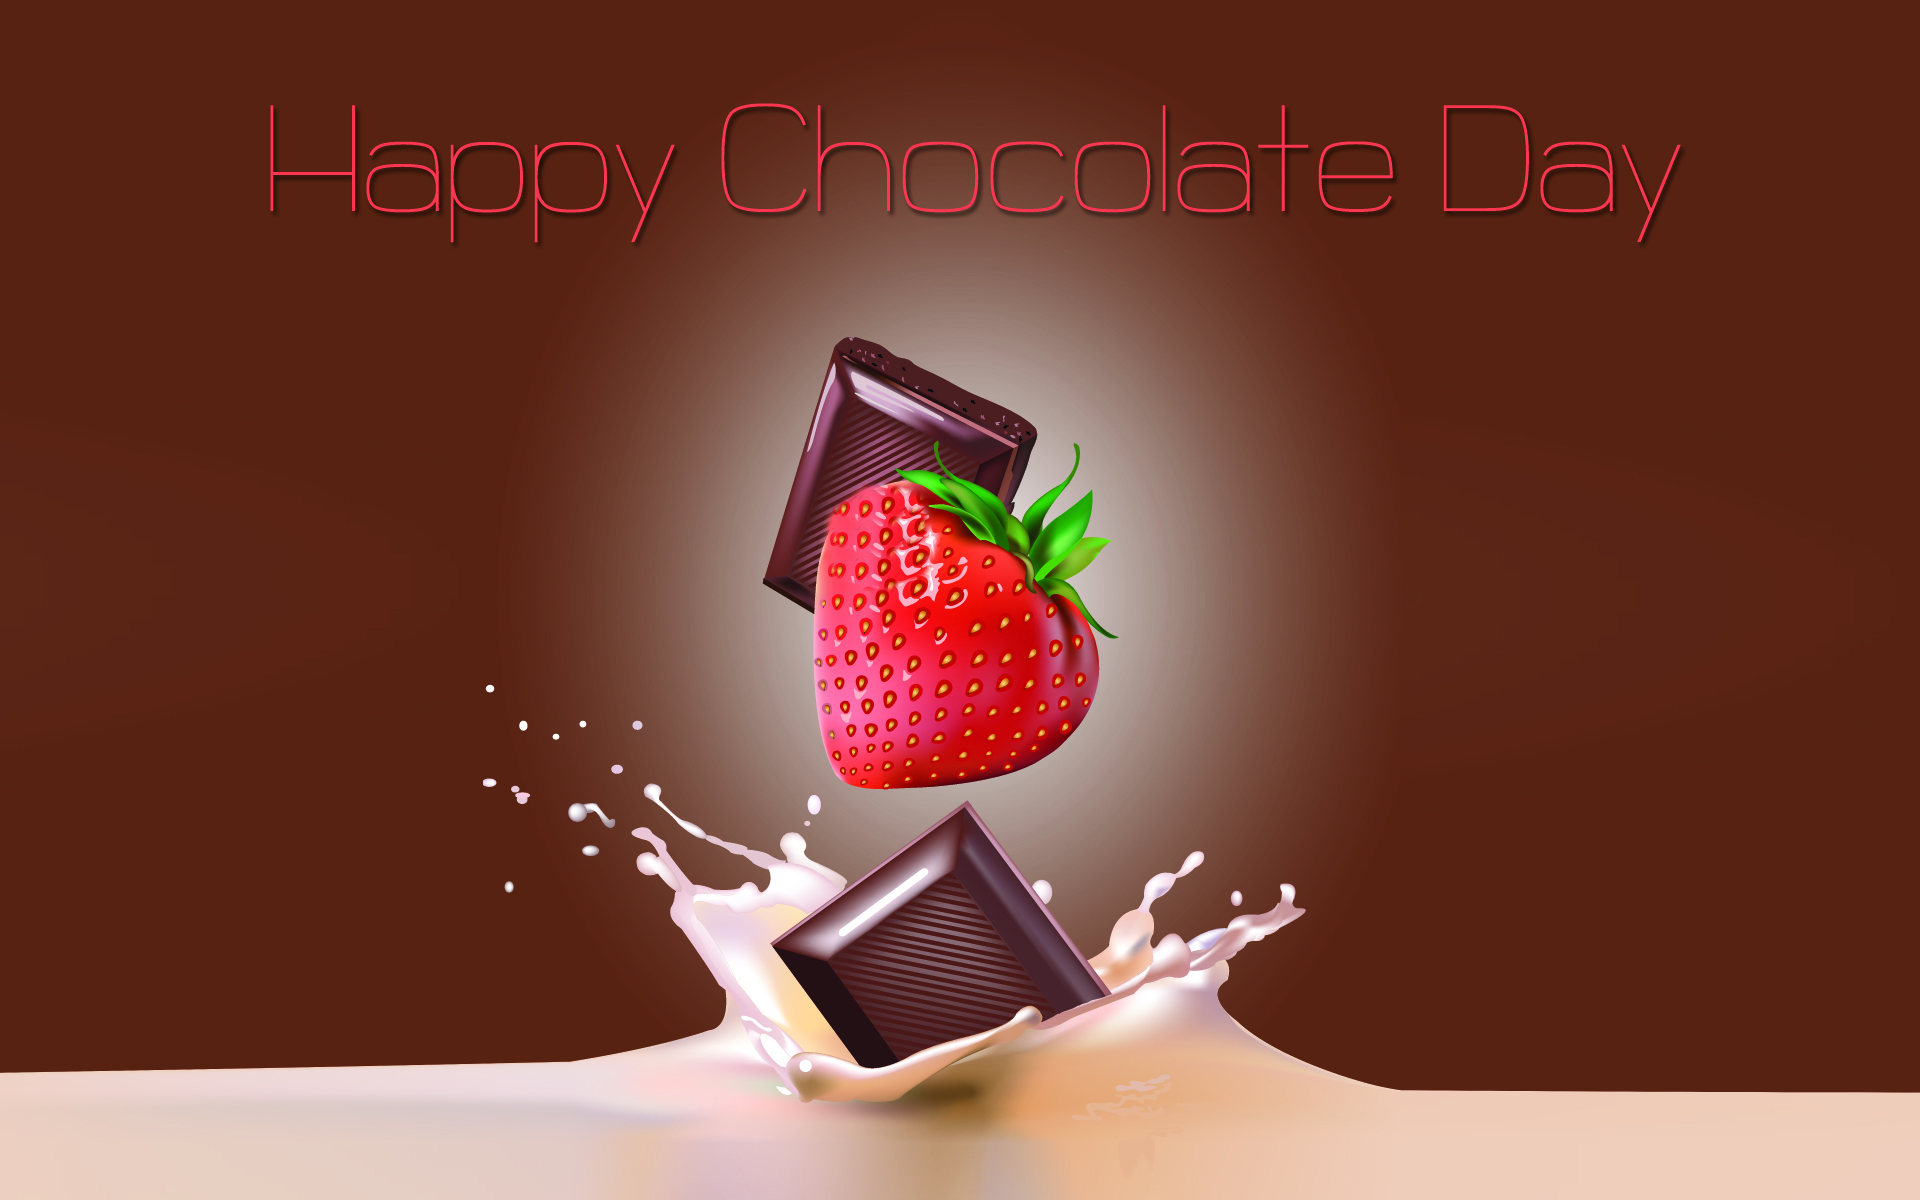 Happy Chocolate Day Wishes HD Wallpaper